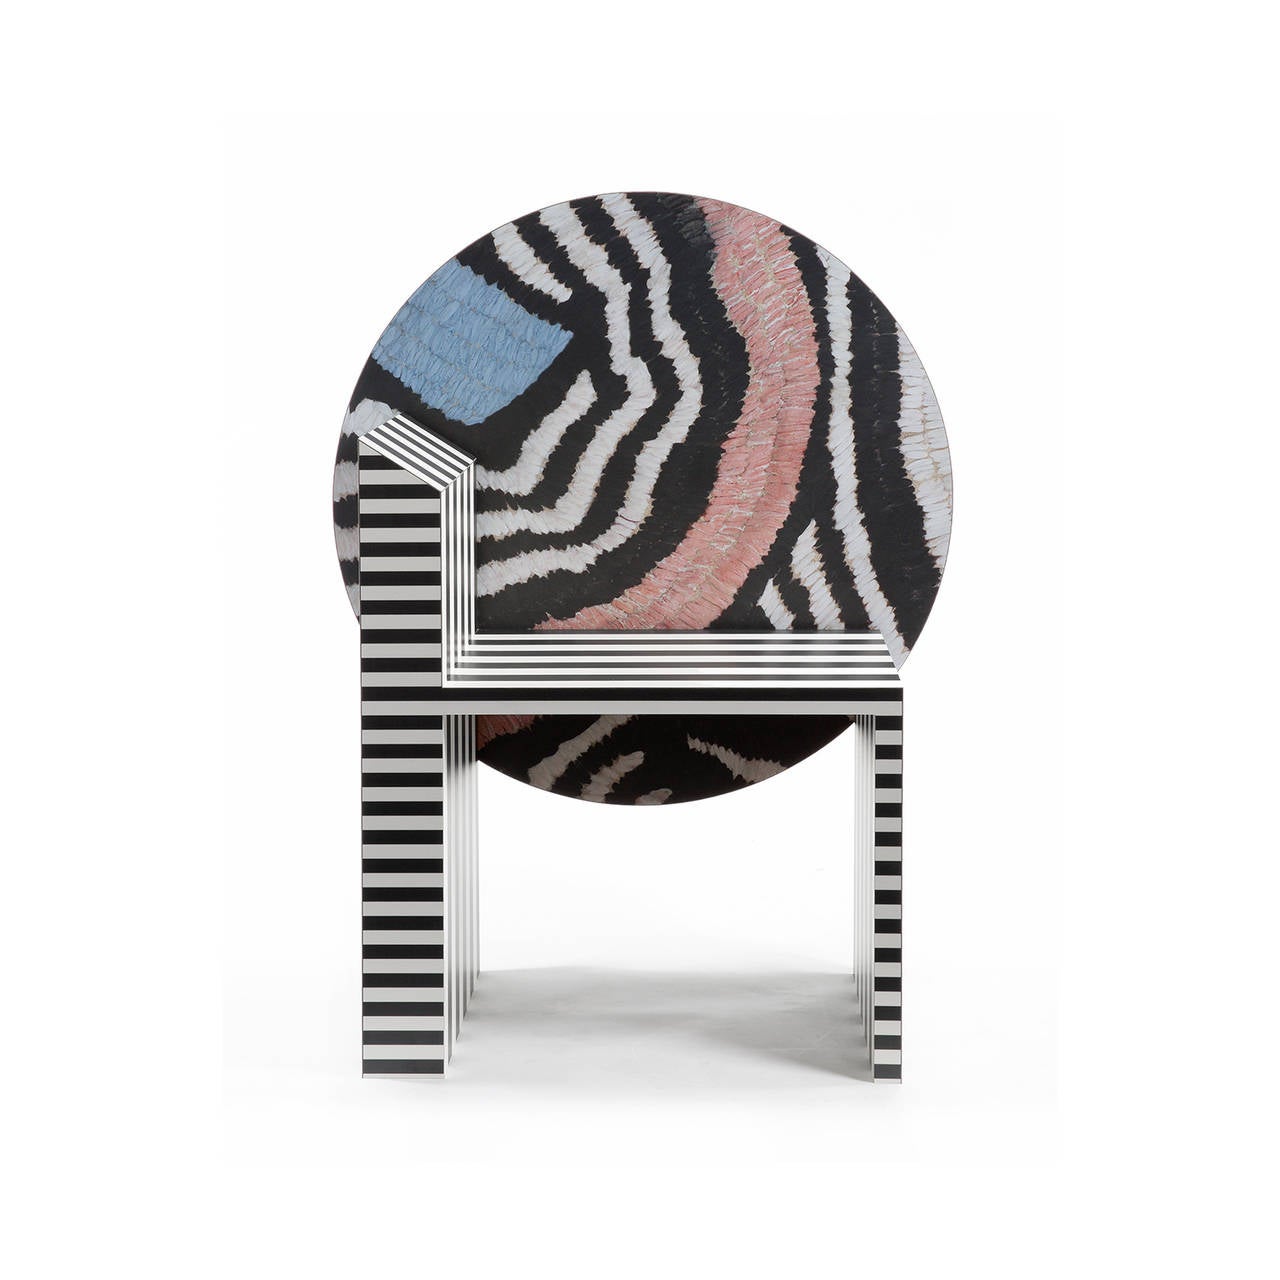 Unique sculptural chair inspired by the Memphis Group design movement with original laminate prints by Kelly Behun Studio.